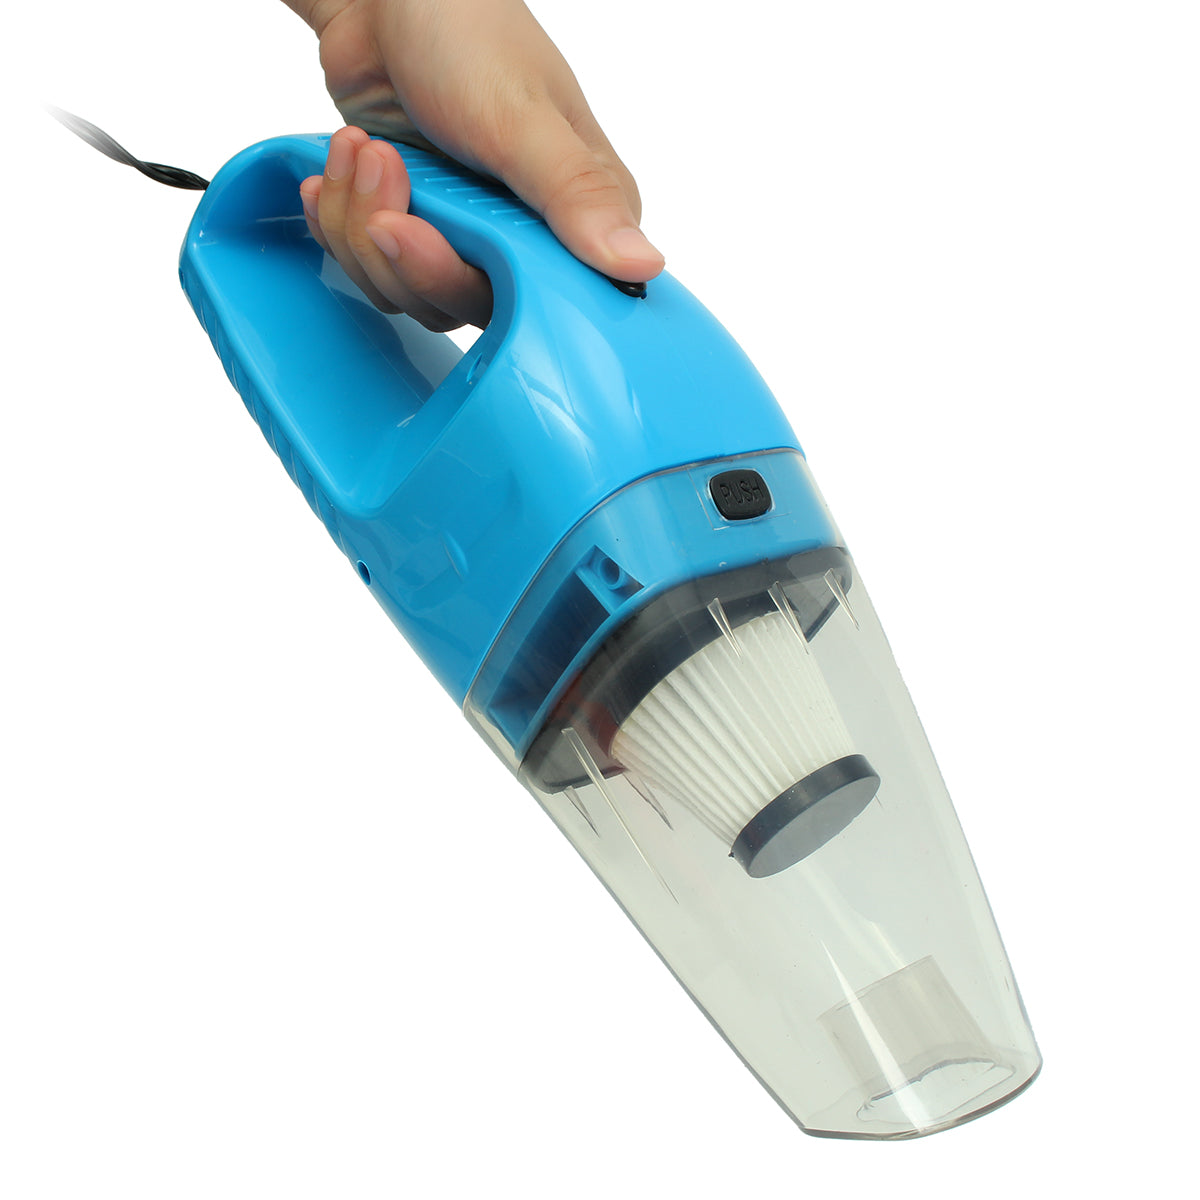 12V 120W Mini Handheld Vacuum Cleaner Useful In-Car Portable Wet & Dry Car Home - Auto GoShop